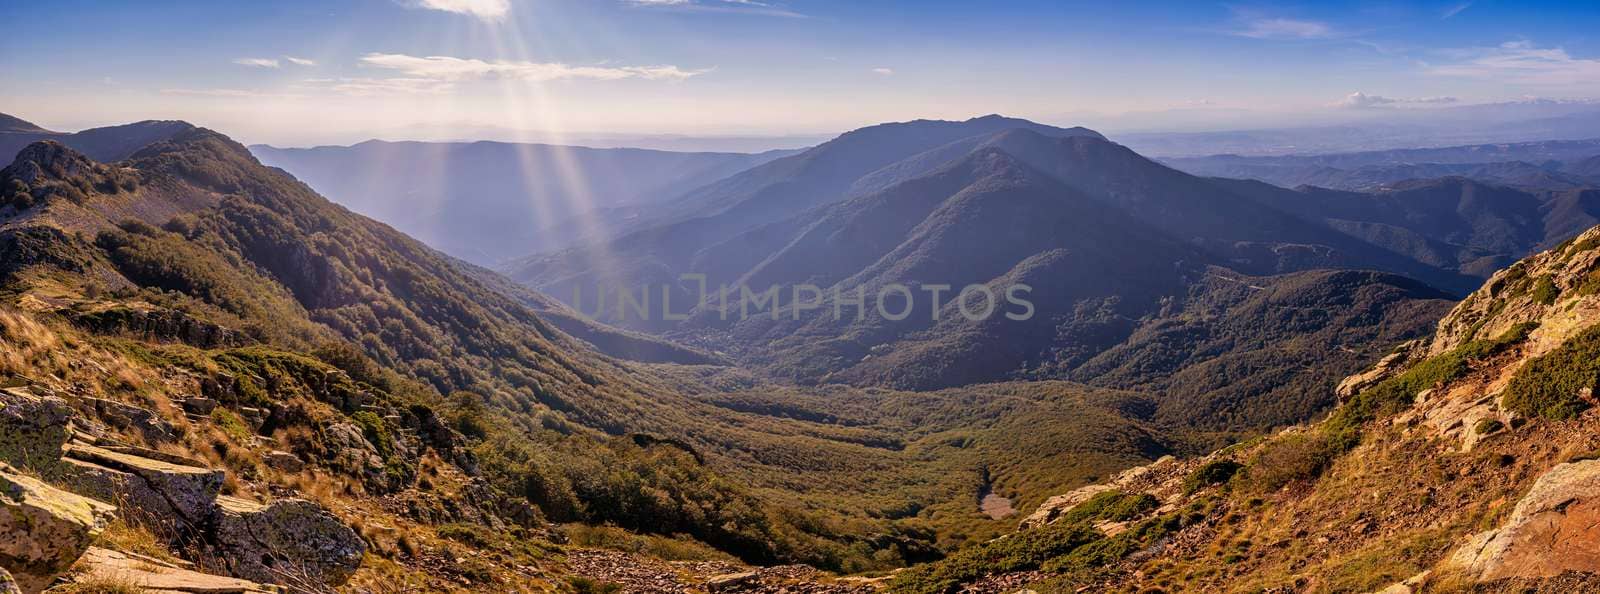 Sunset light over the mountain Montseny in Spain by Digoarpi